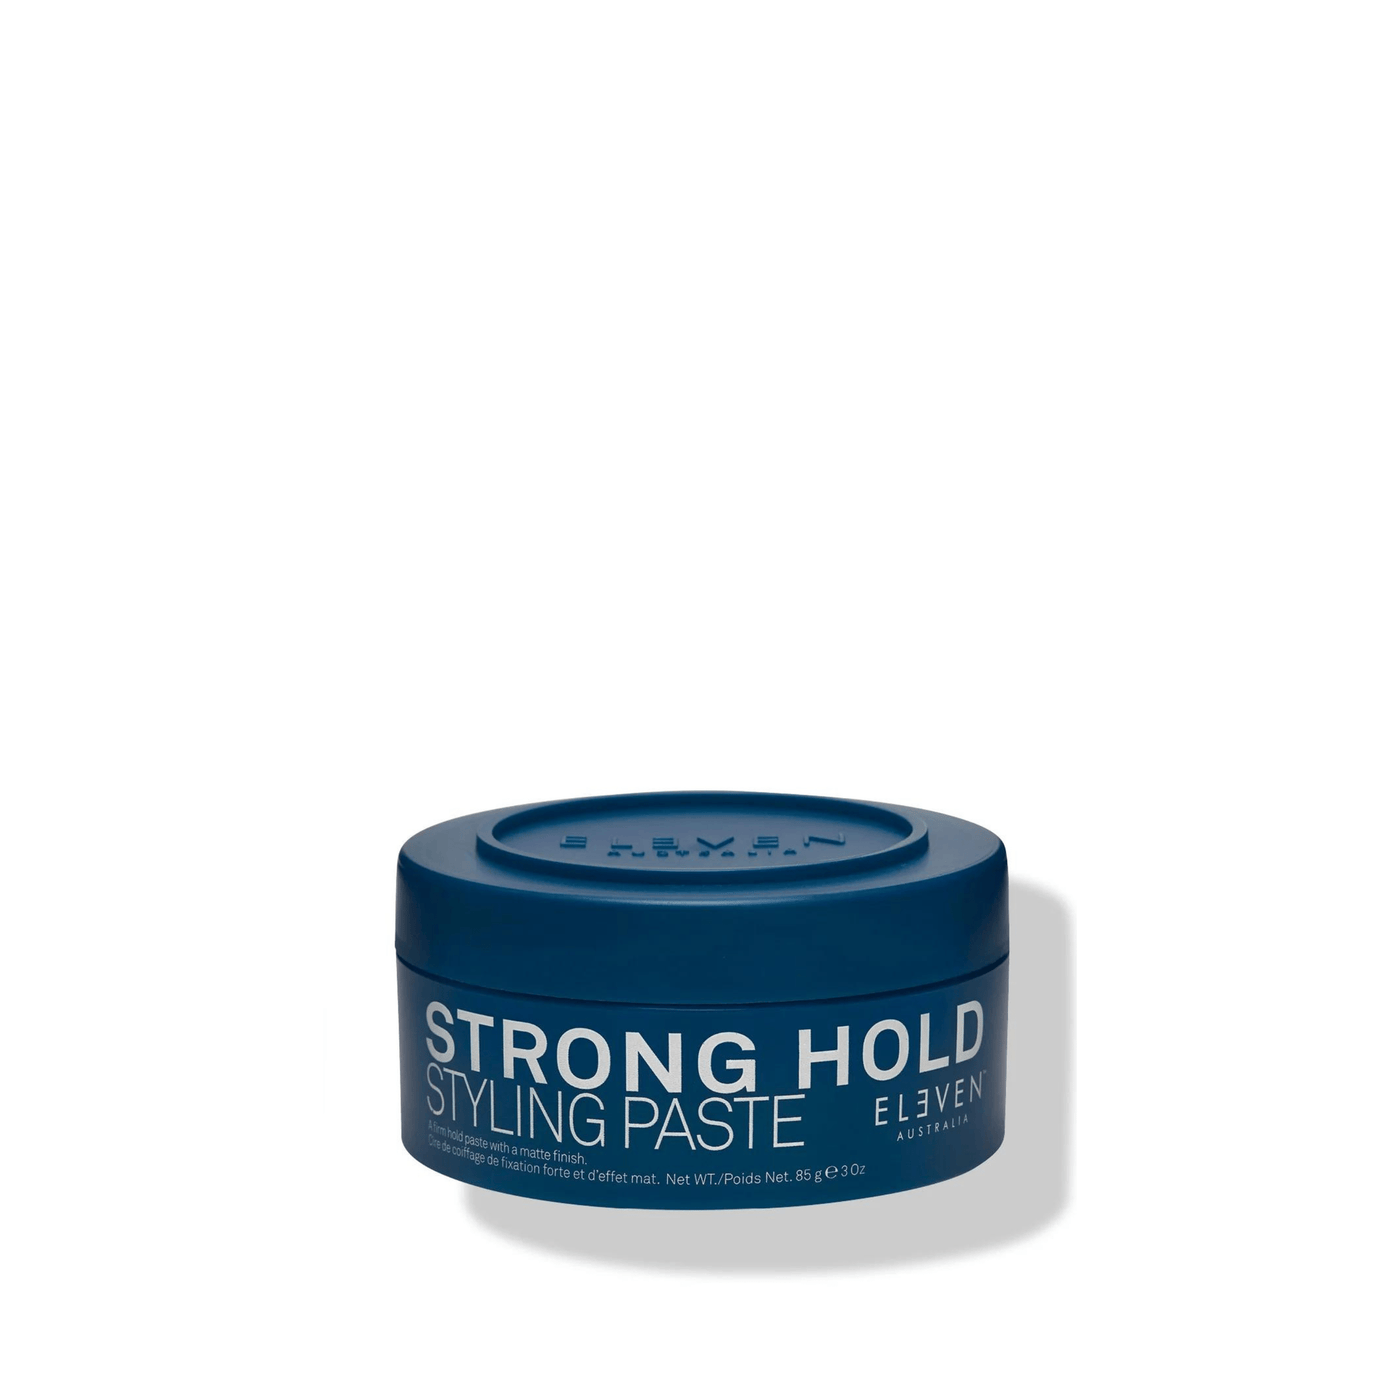 ELEVEN Australia Styling Strong Hold Styling Paste 85g